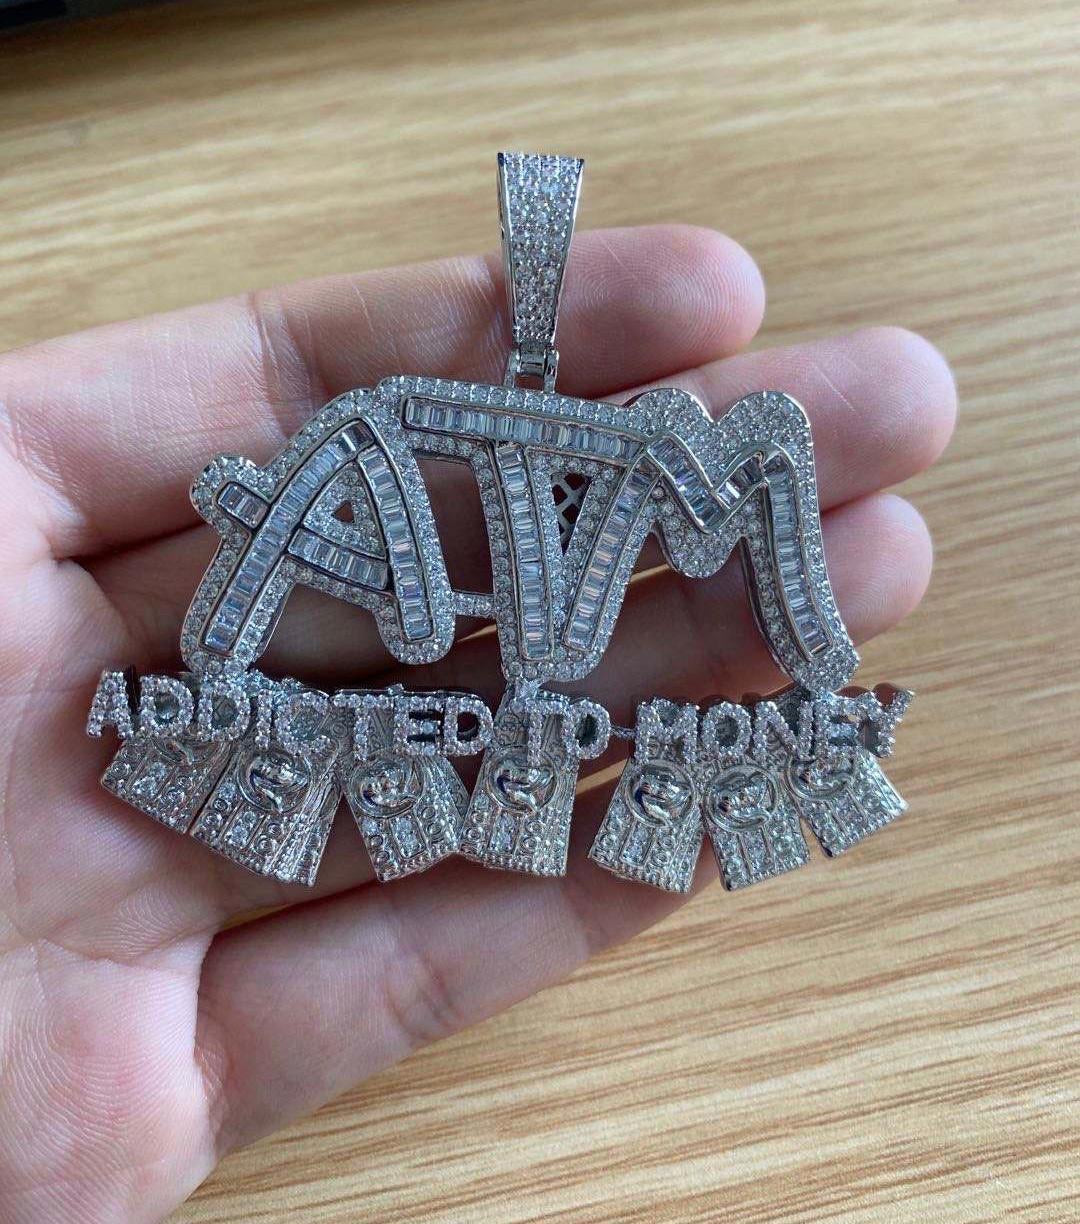 ATM Pendant with Necklace